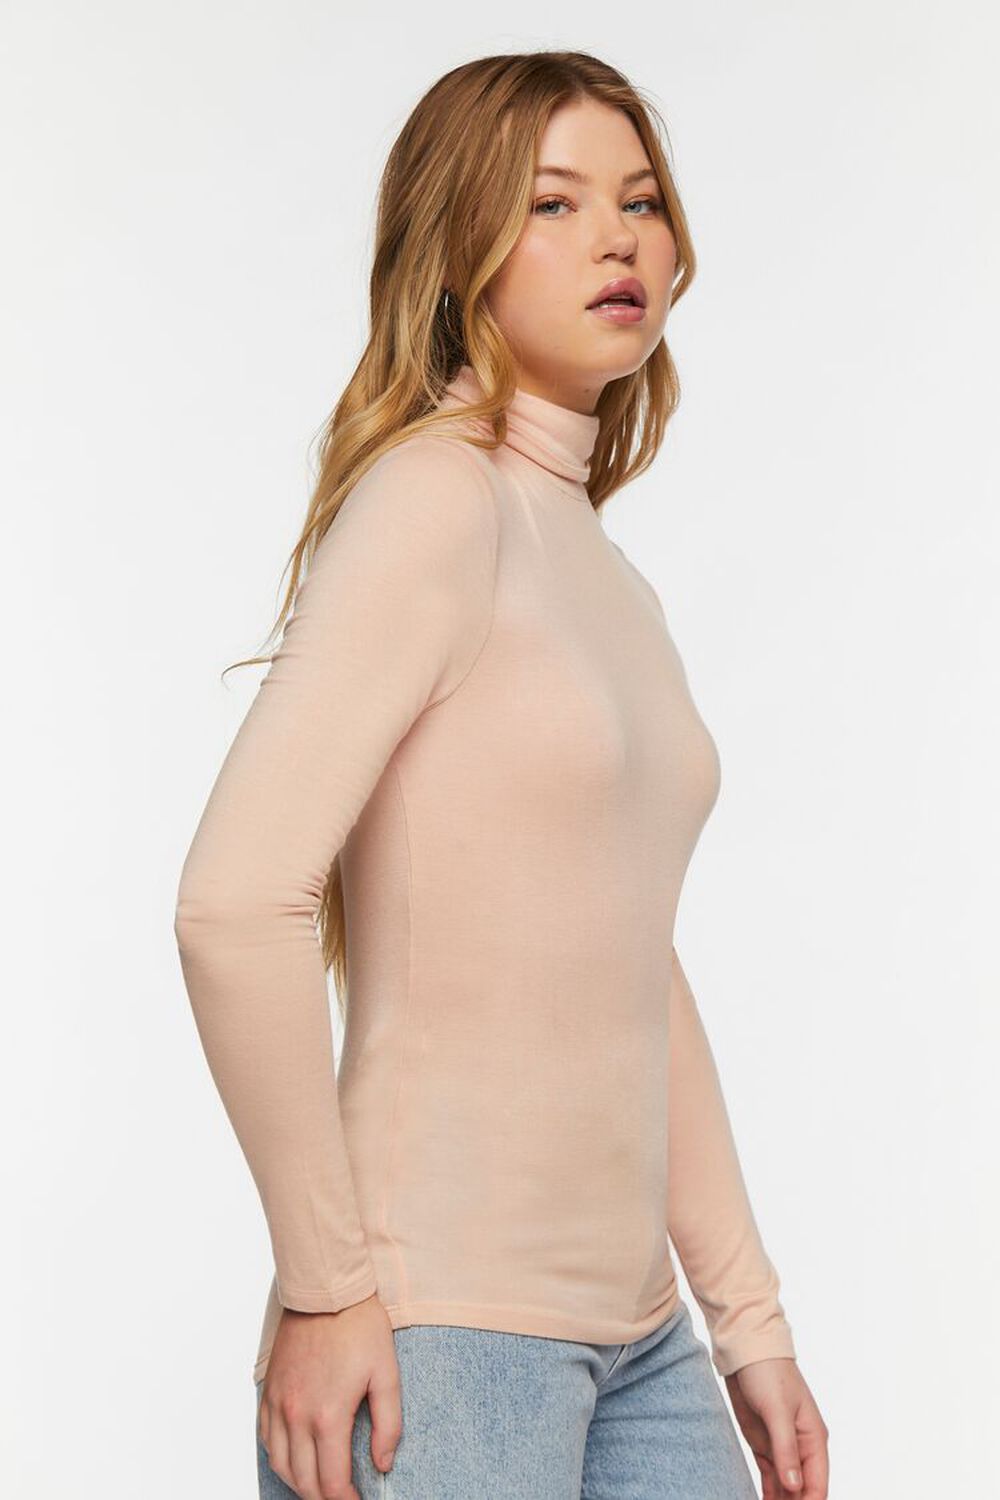 PINK Fitted Long-Sleeve Turtleneck Top, image 2